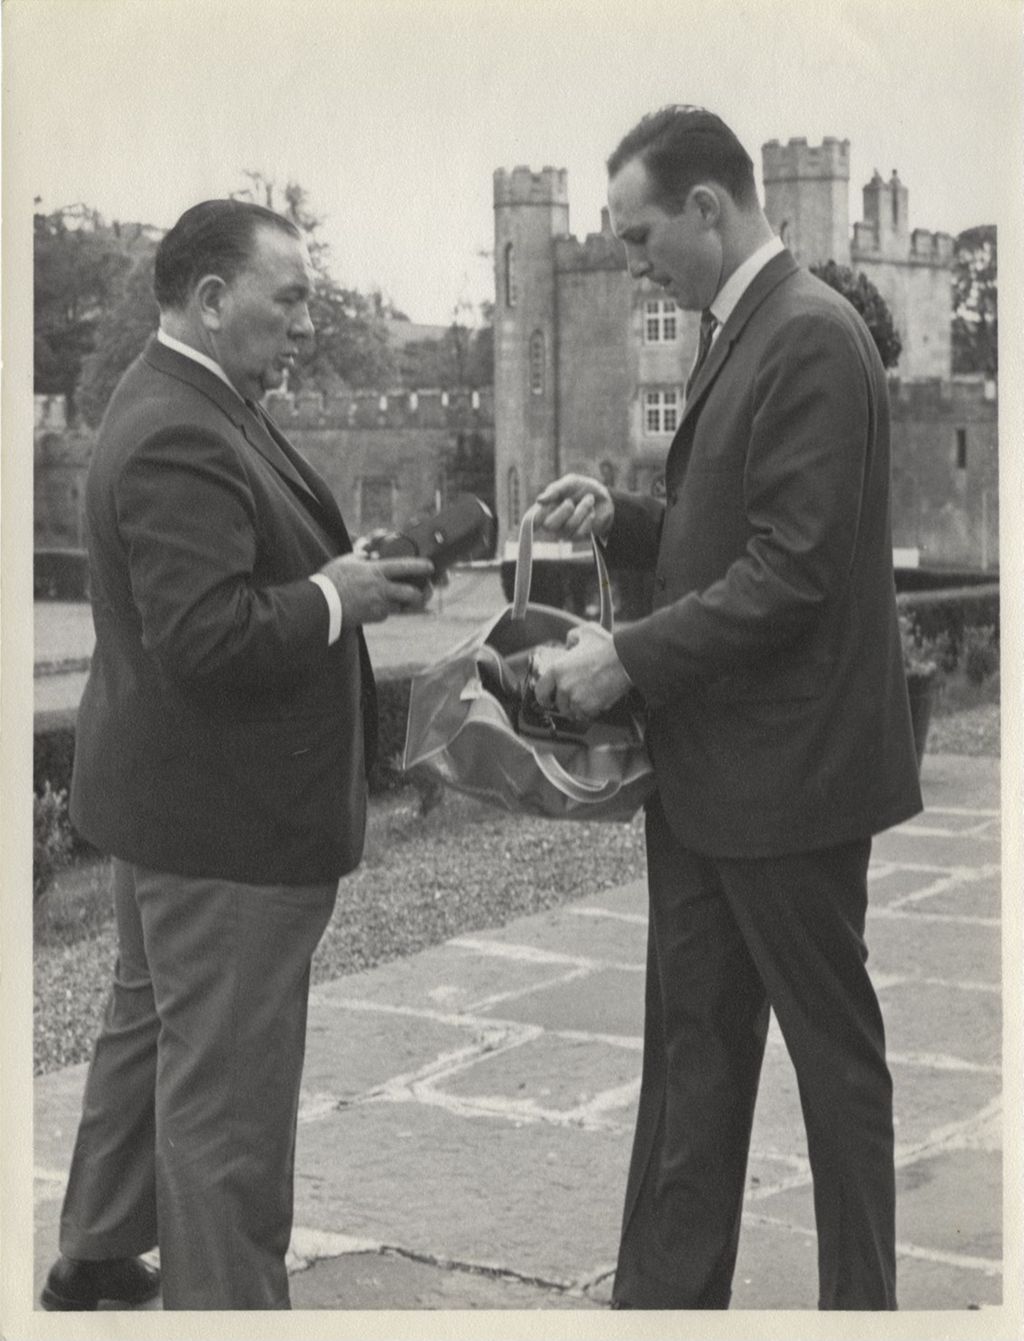 Miniature of Trip to Ireland, Richard J. Daley and bodyguard outside castle